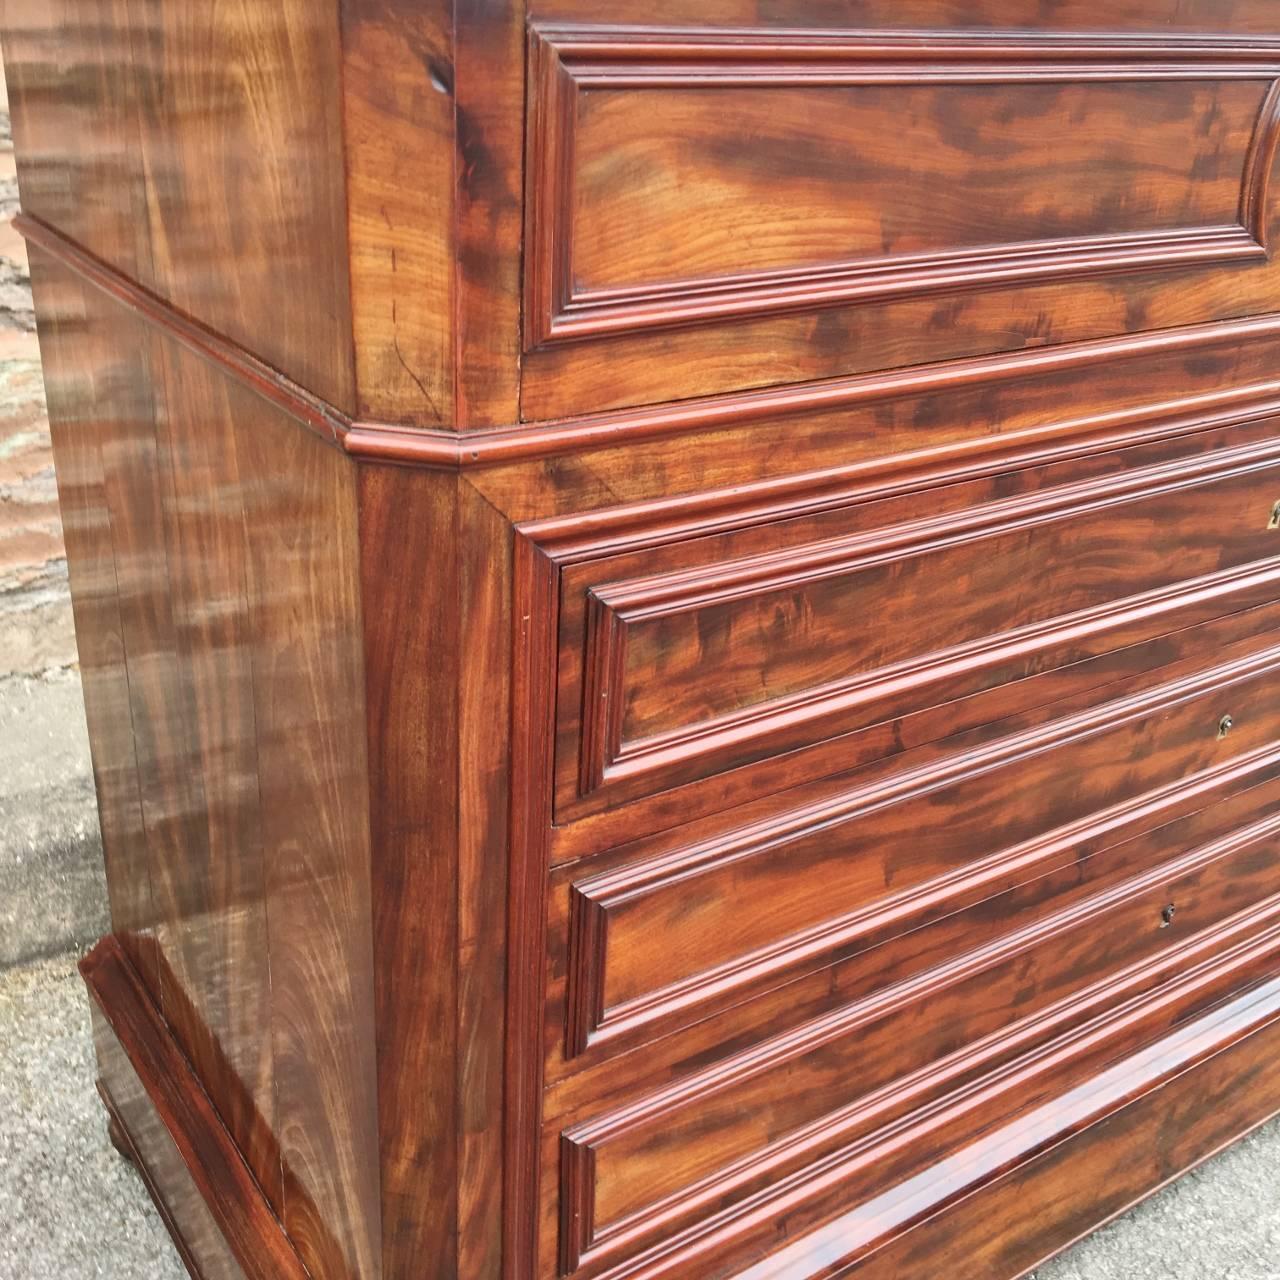 Antique mahogany secretaire chest of drawers in excellent condition. French, and dated to about 1860, it has been beautifully maintained by former owners andis seen here in excellent condition. The entire chest is veneered in the most attractive